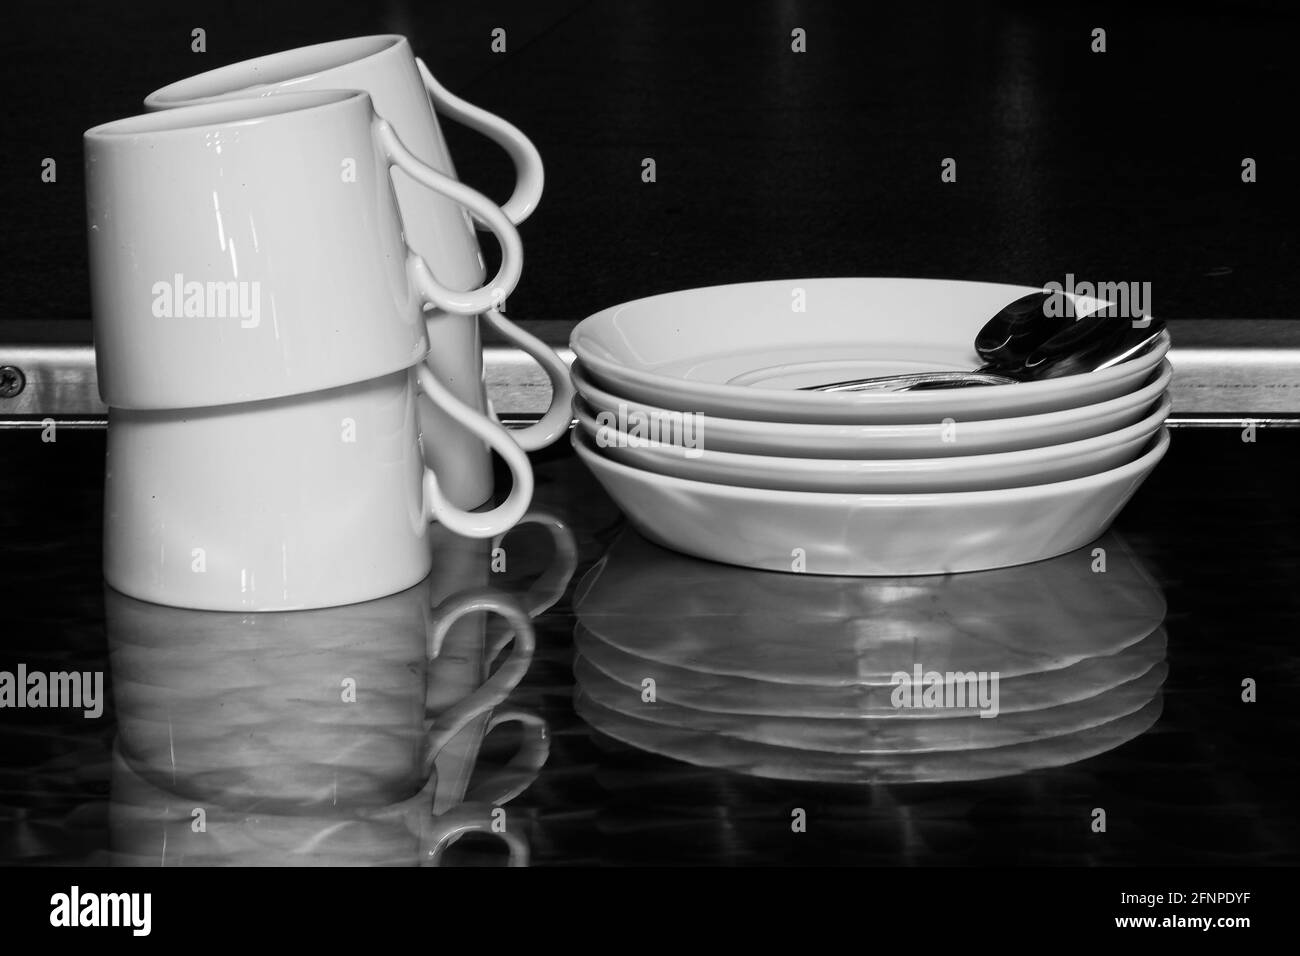 Cups and saucers for coffee or tee Stock Photo